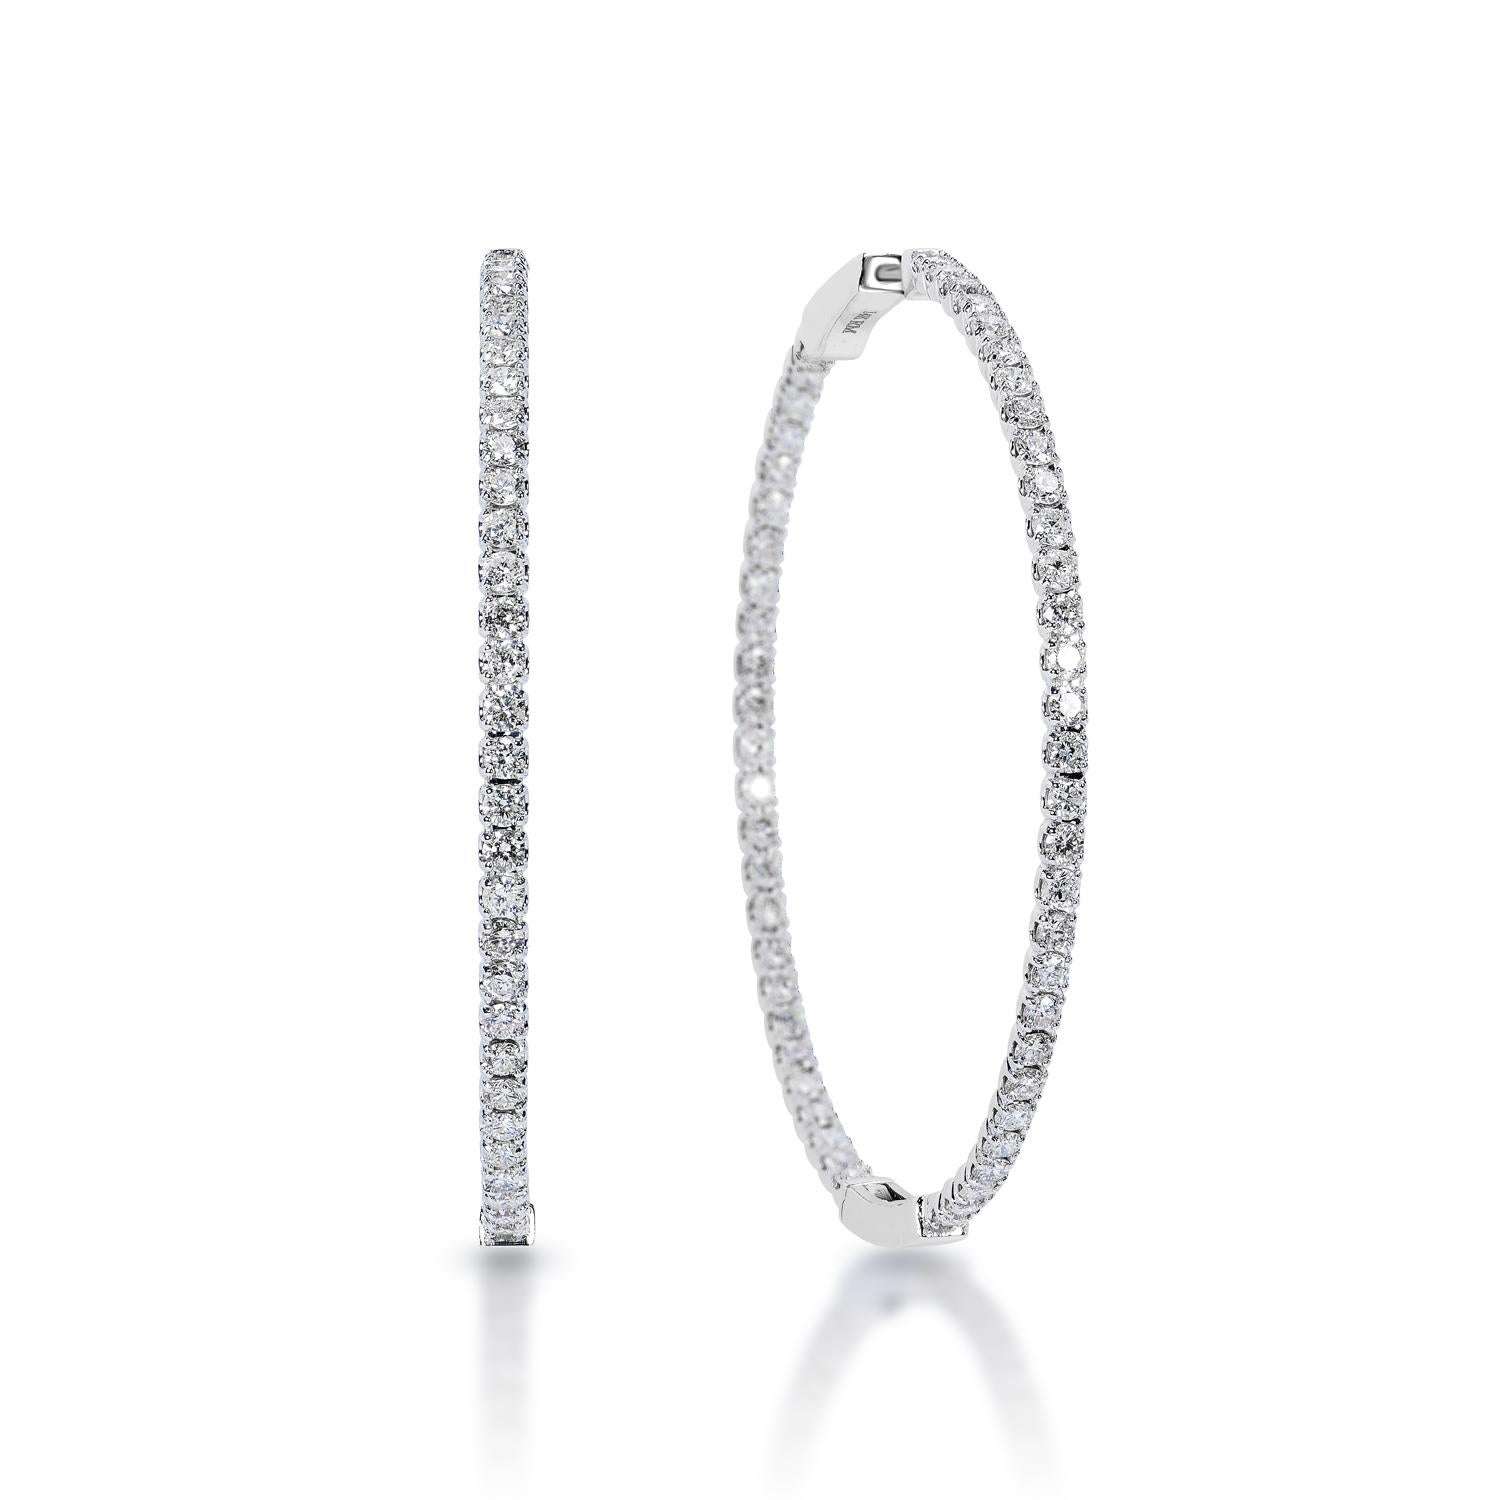 Diamond Hoop Earrings:
Circle Hoop earrings one row of diamonds inside and outside.  diameter is a little bit under 2 inches


Carat Weight: 3.27 Carats , (110 diamonds)
Shape: Round Brilliant Cut
Metal: 14 Karat in White Gold 9.05 grams 
Style: